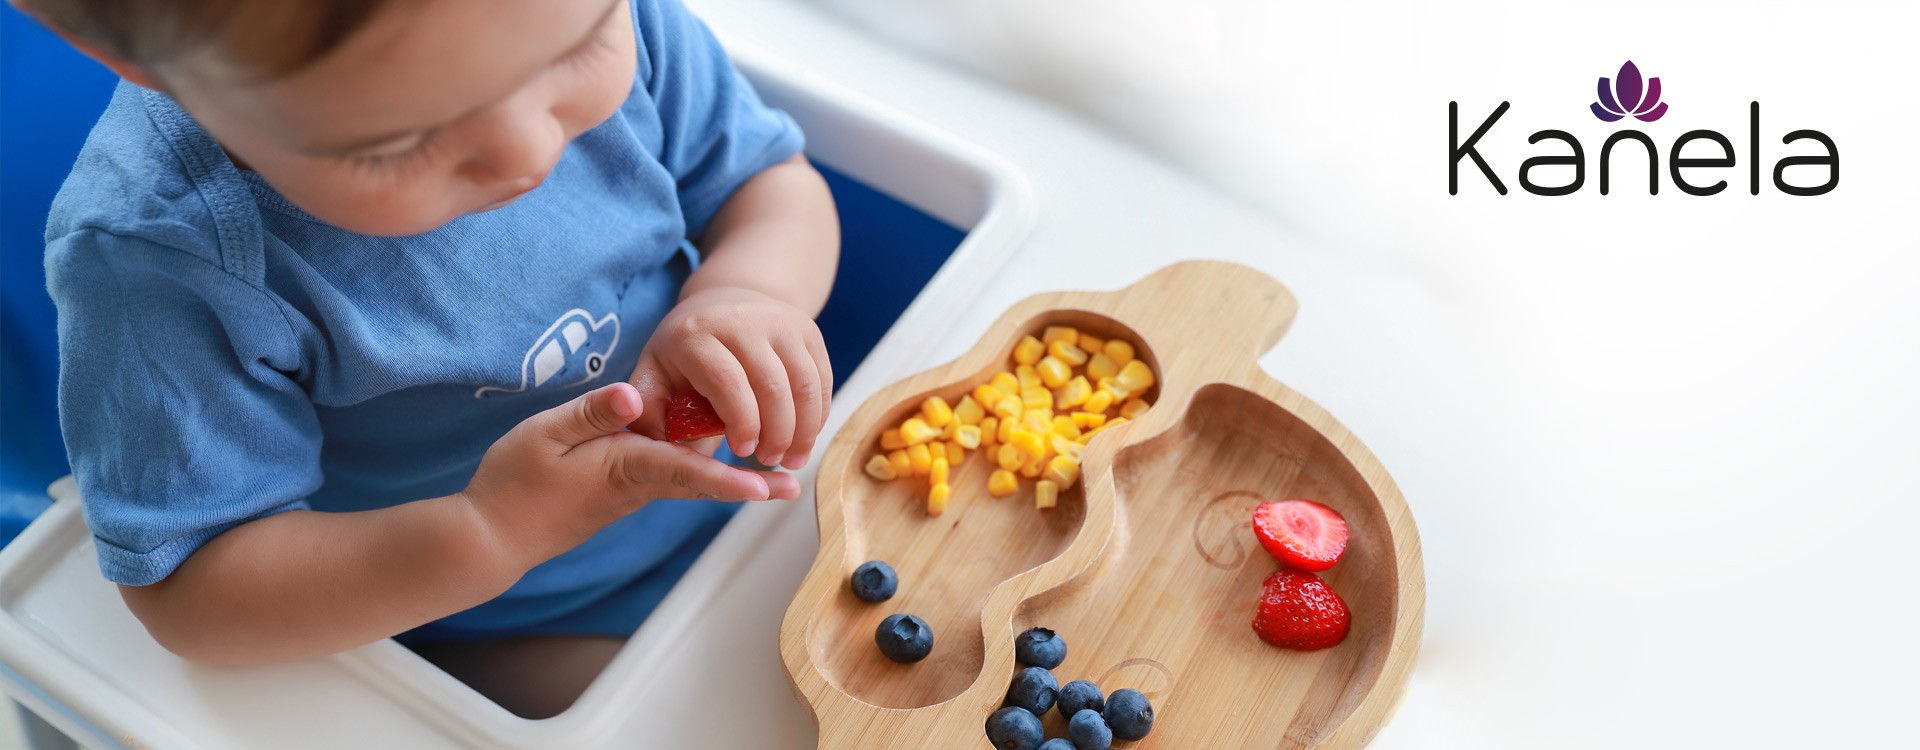 Nutrition: The right snacks for toddlers